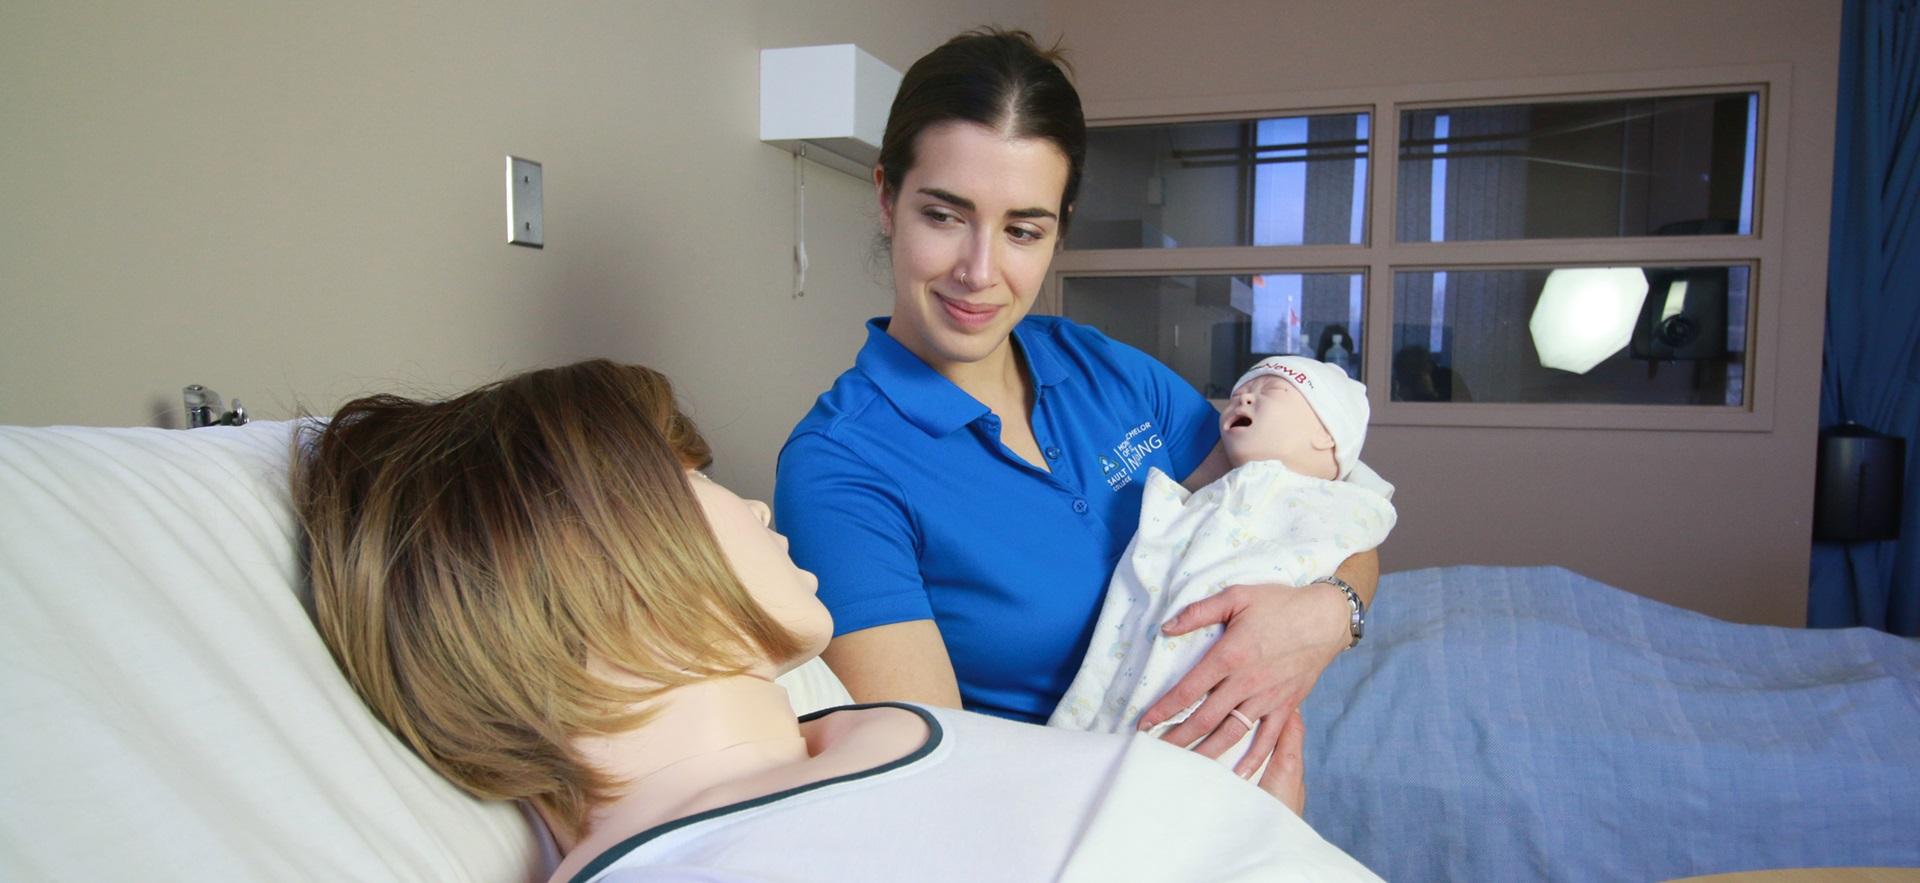 Nursing student holding infant sim manikin and at the bedside of the mother sim manikin